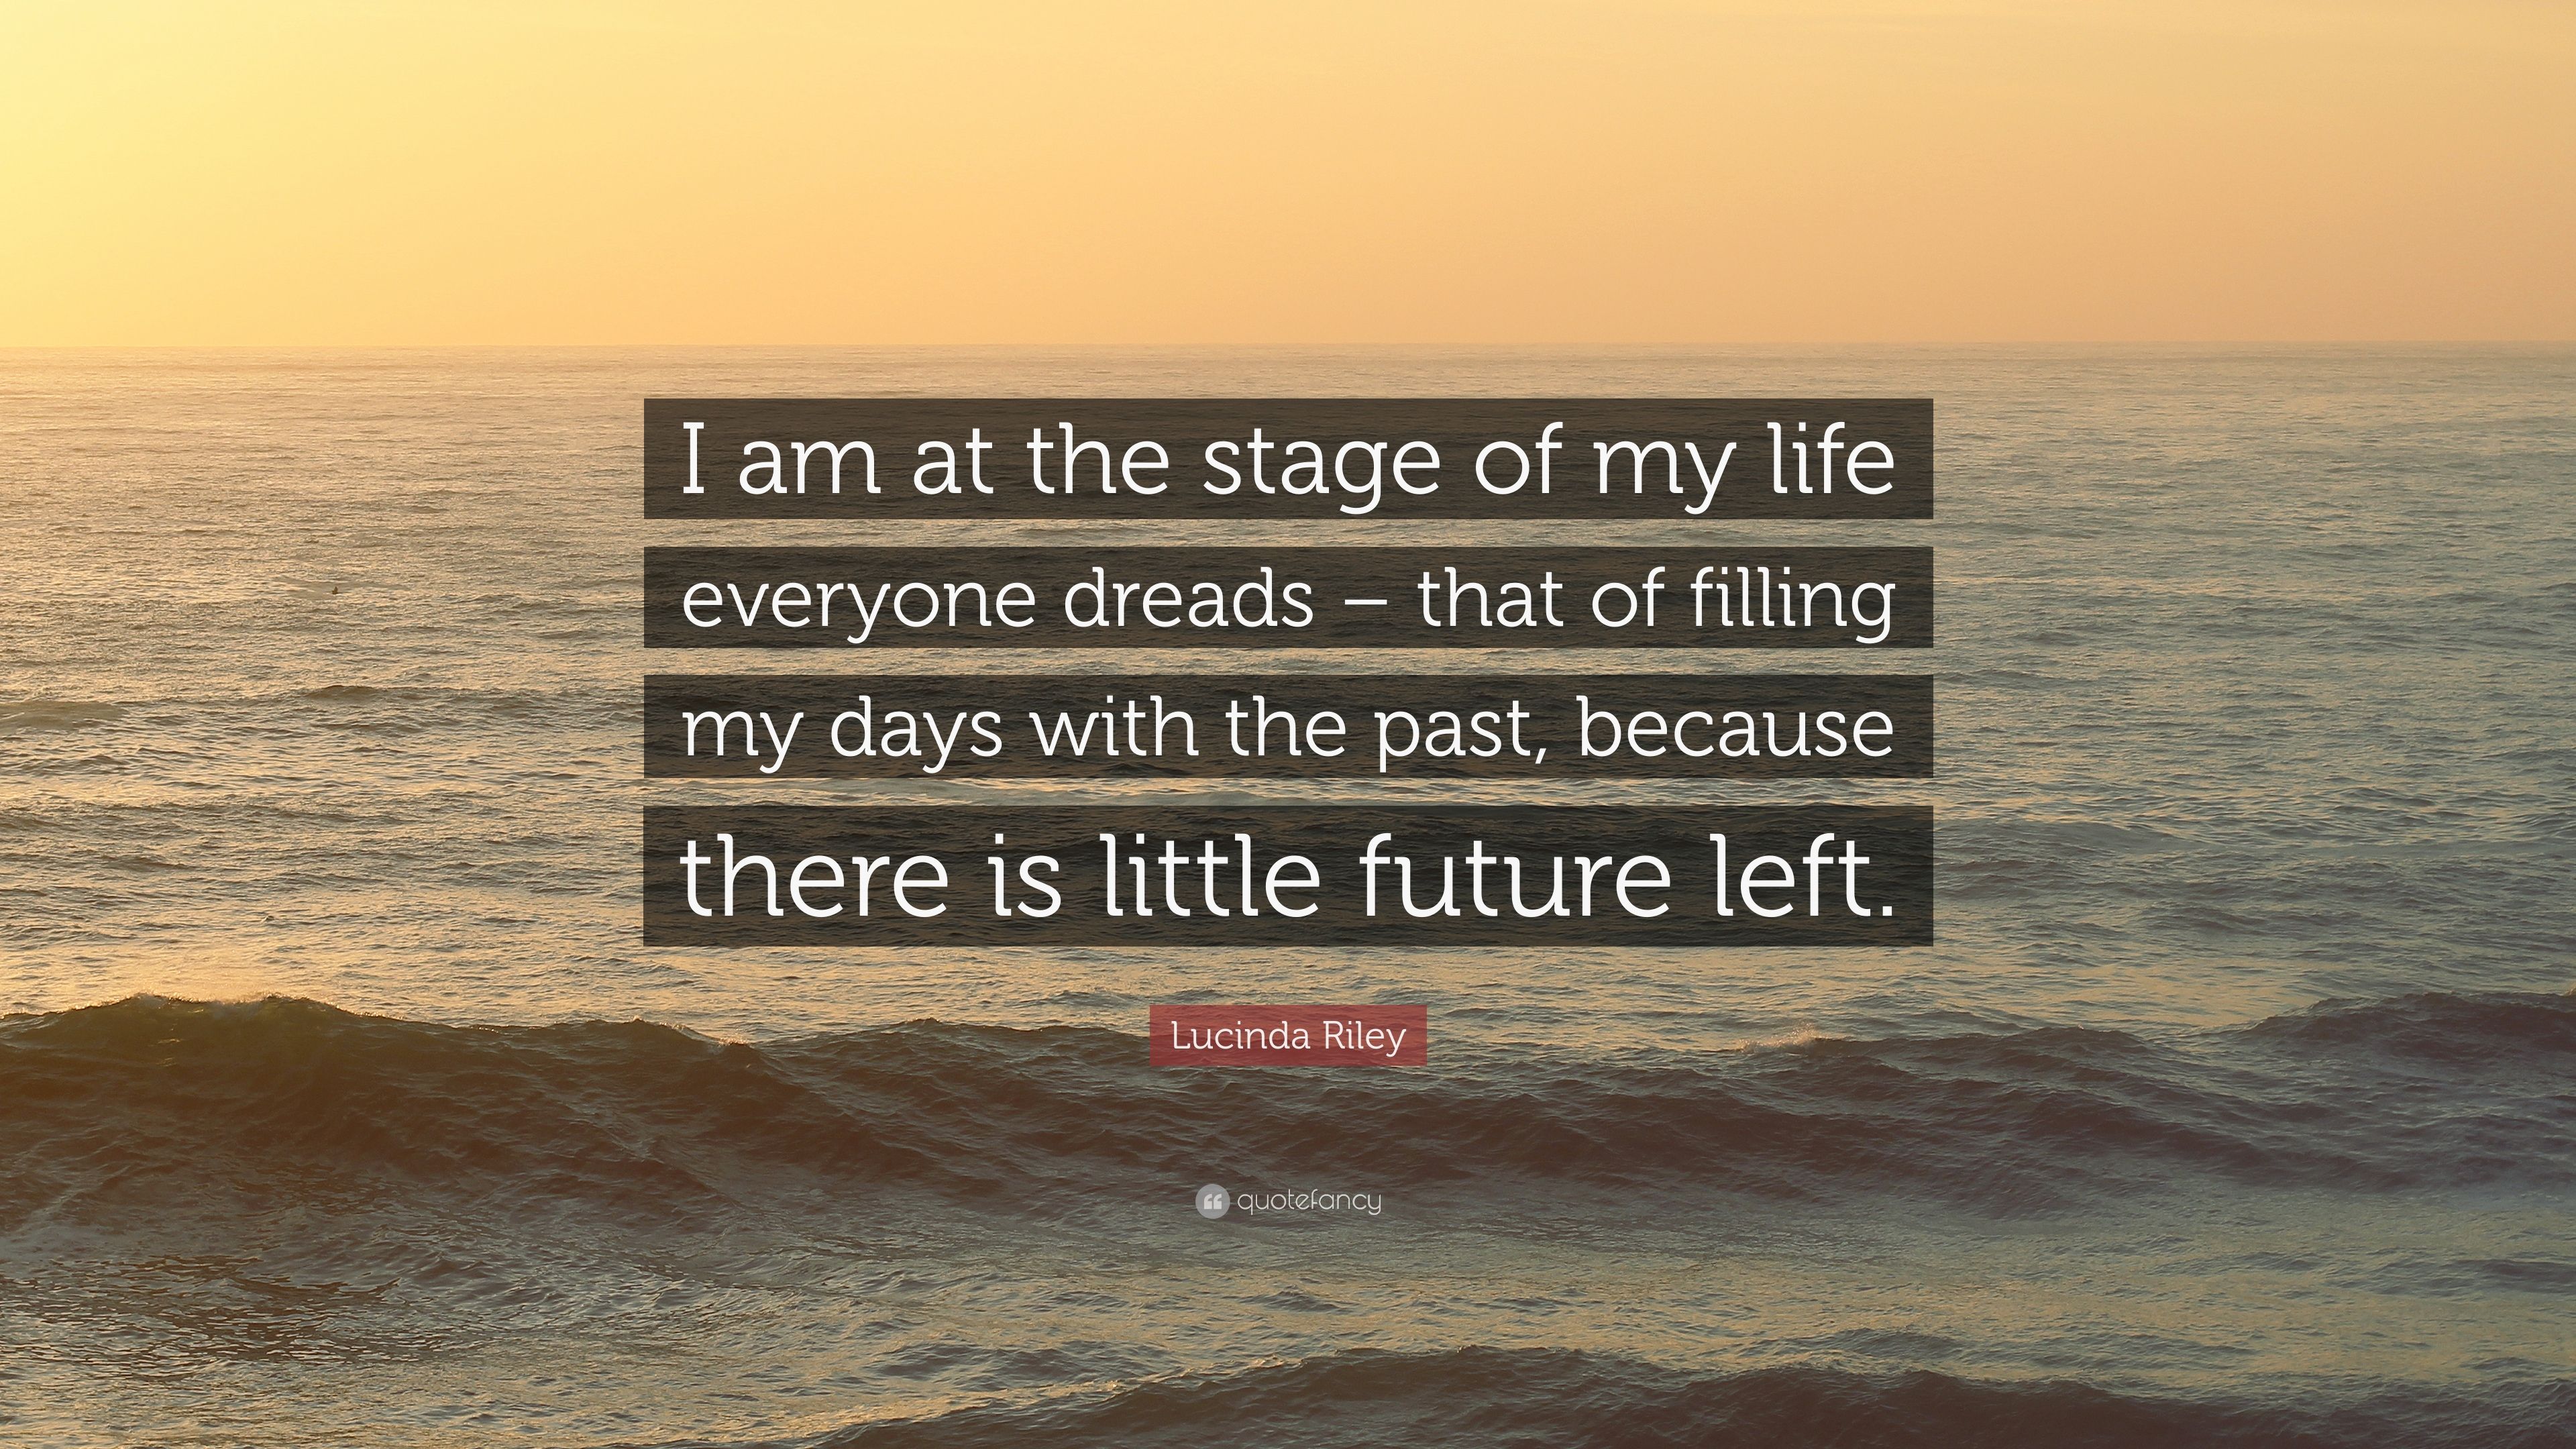 Lucinda Riley Quote: “I am at the stage of my life everyone dreads